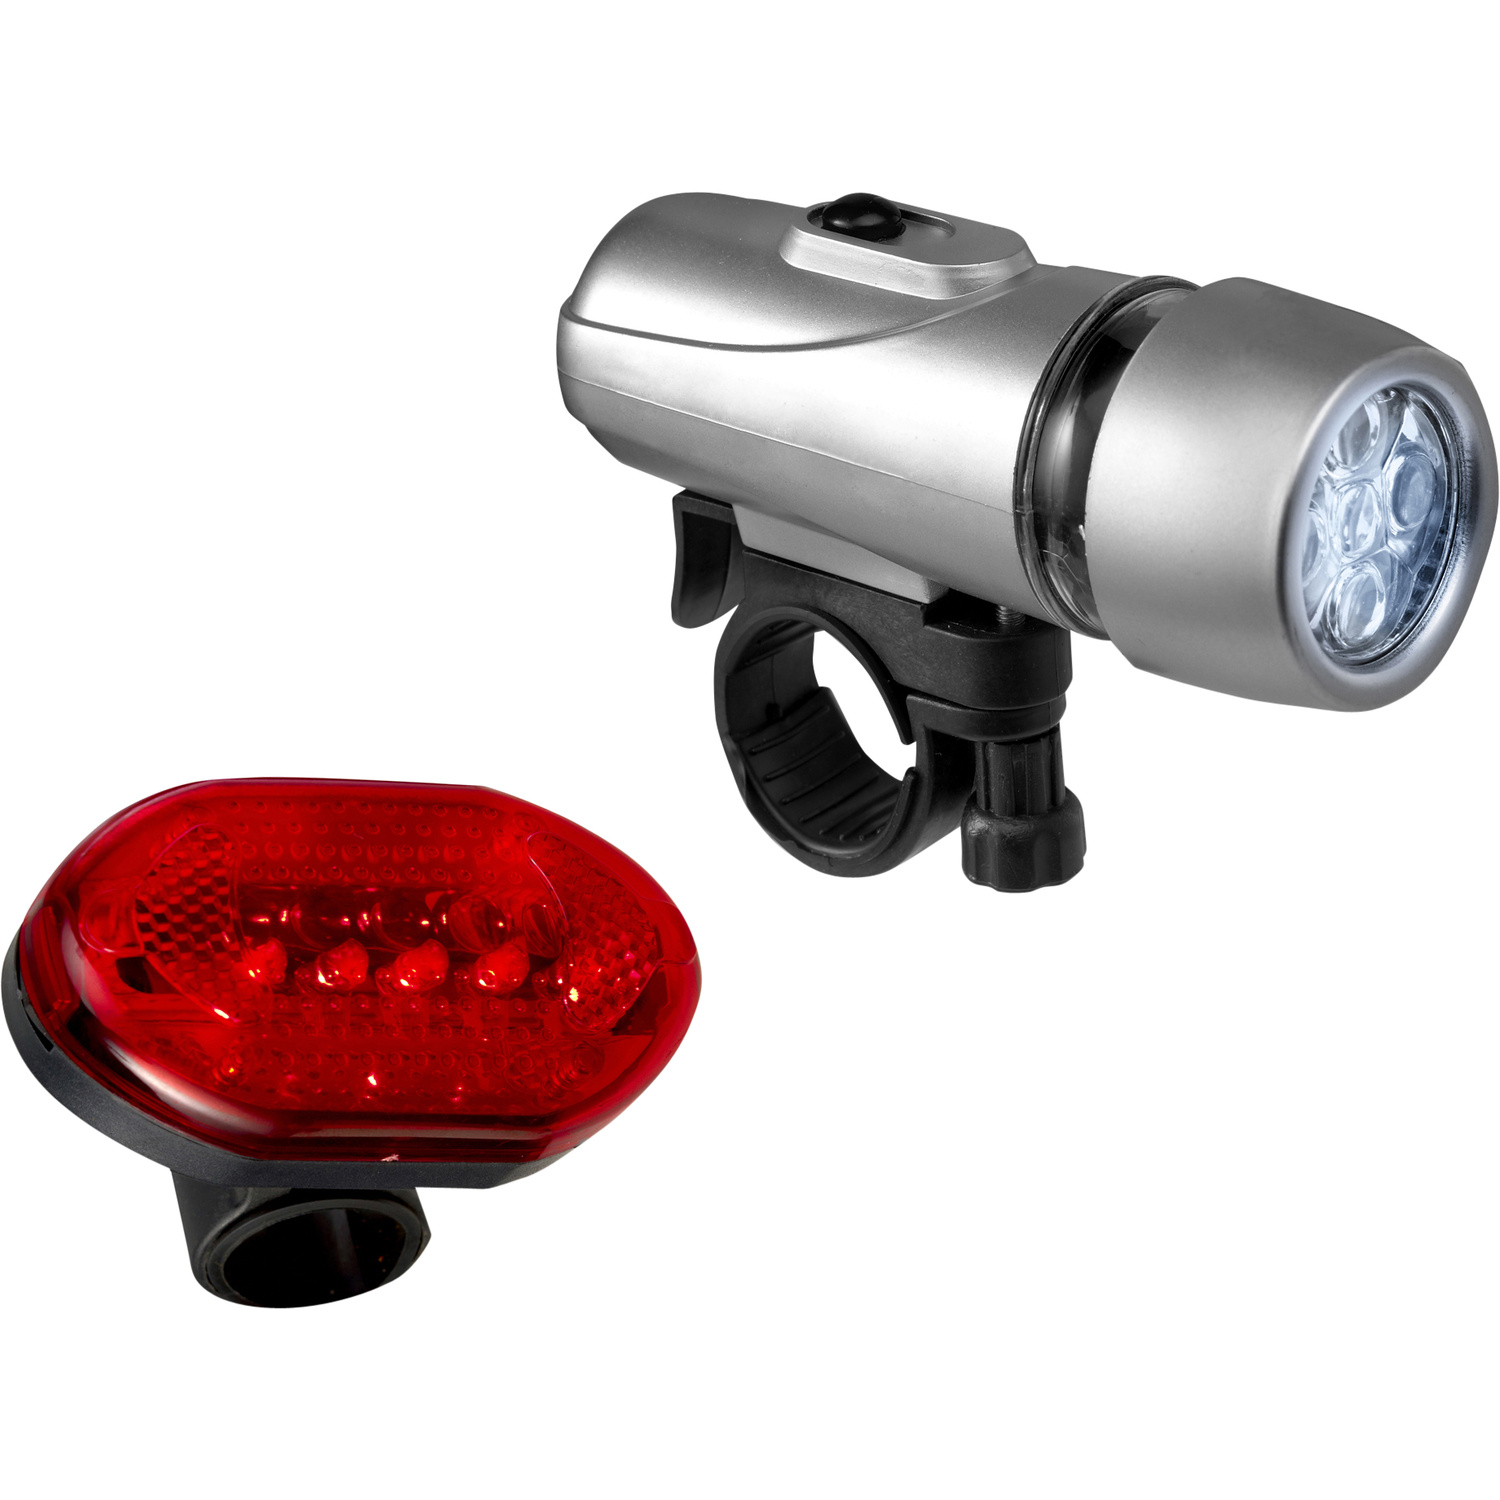 004856 009999999 3d135 lft pro01 fal - Two Piece Bicycle lights